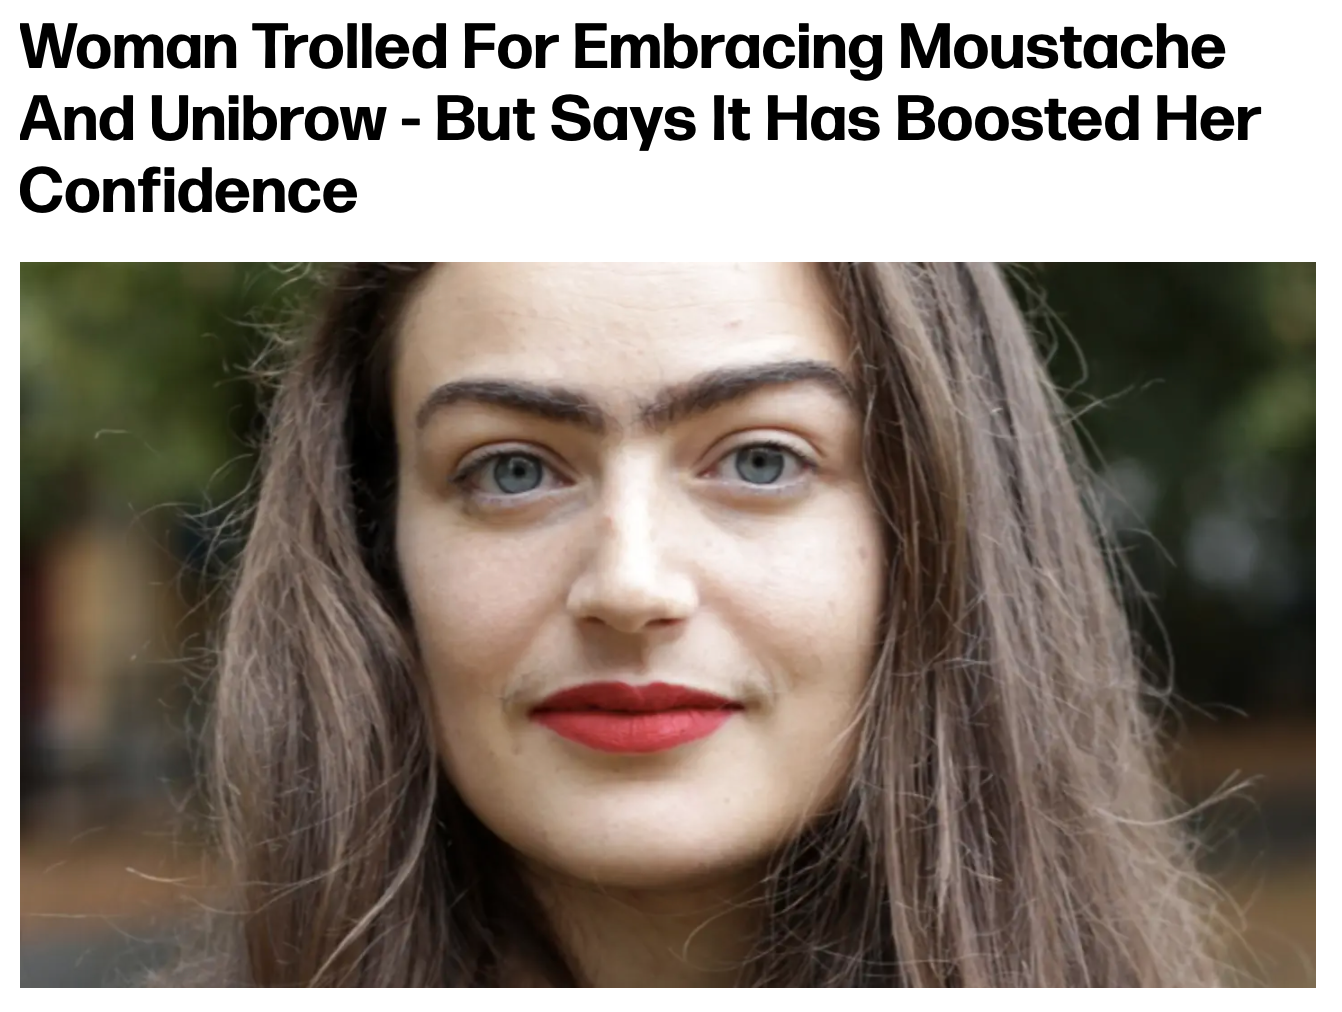 Eldina Jaganjac woman with unibrow and mustache - woman trolled for embracing moustache and unibrow but says it has boosted her confidence